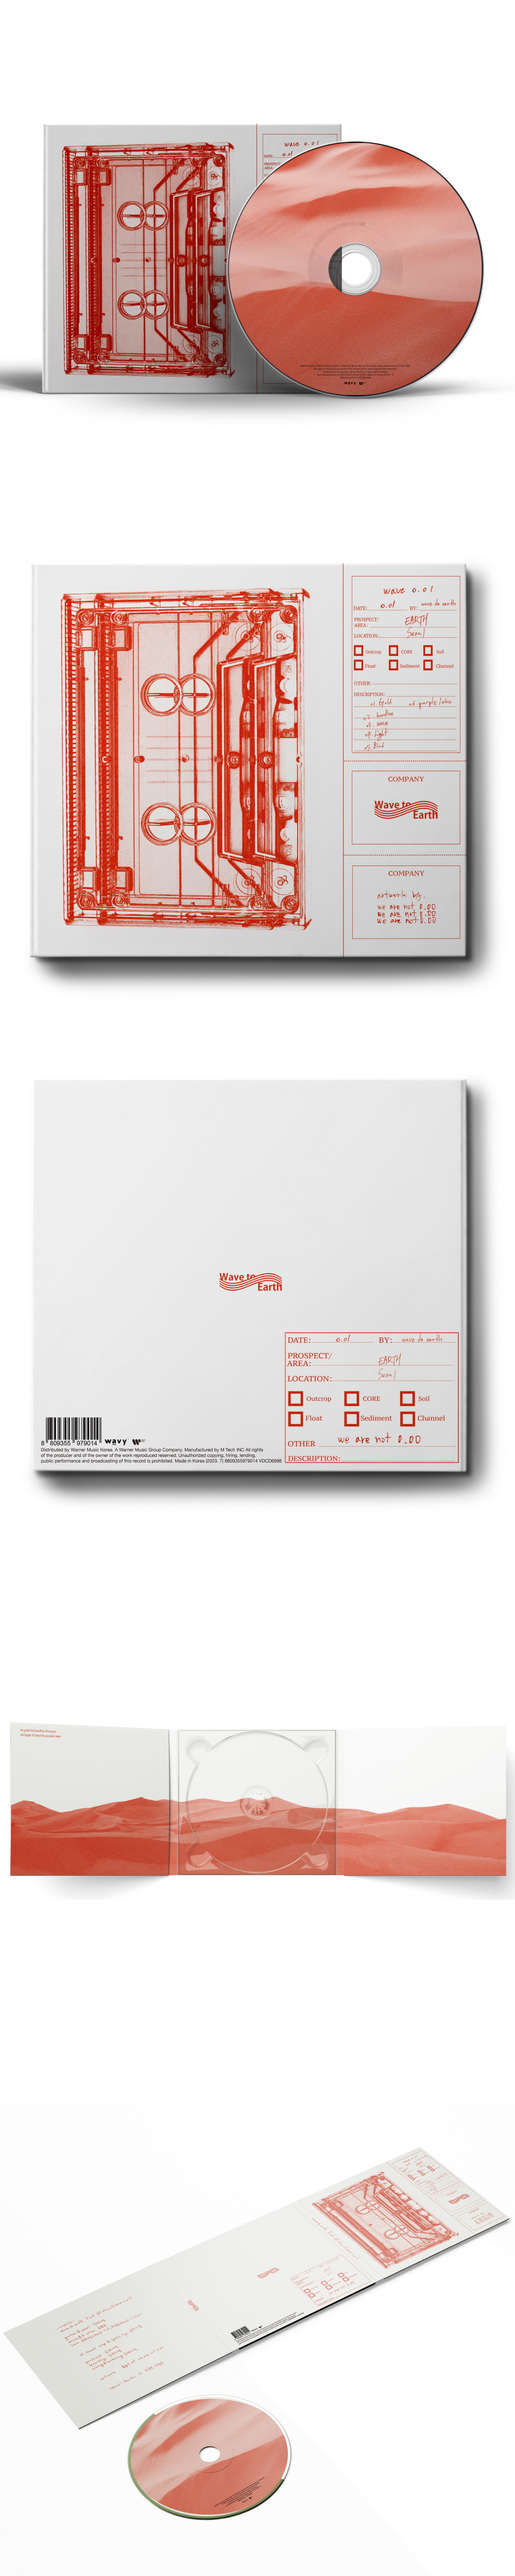 Wave to Earth, 웨이브 투 어스 – uncounted 0.00 (2021, Transparent Red or Clear  White, Vinyl) - Discogs